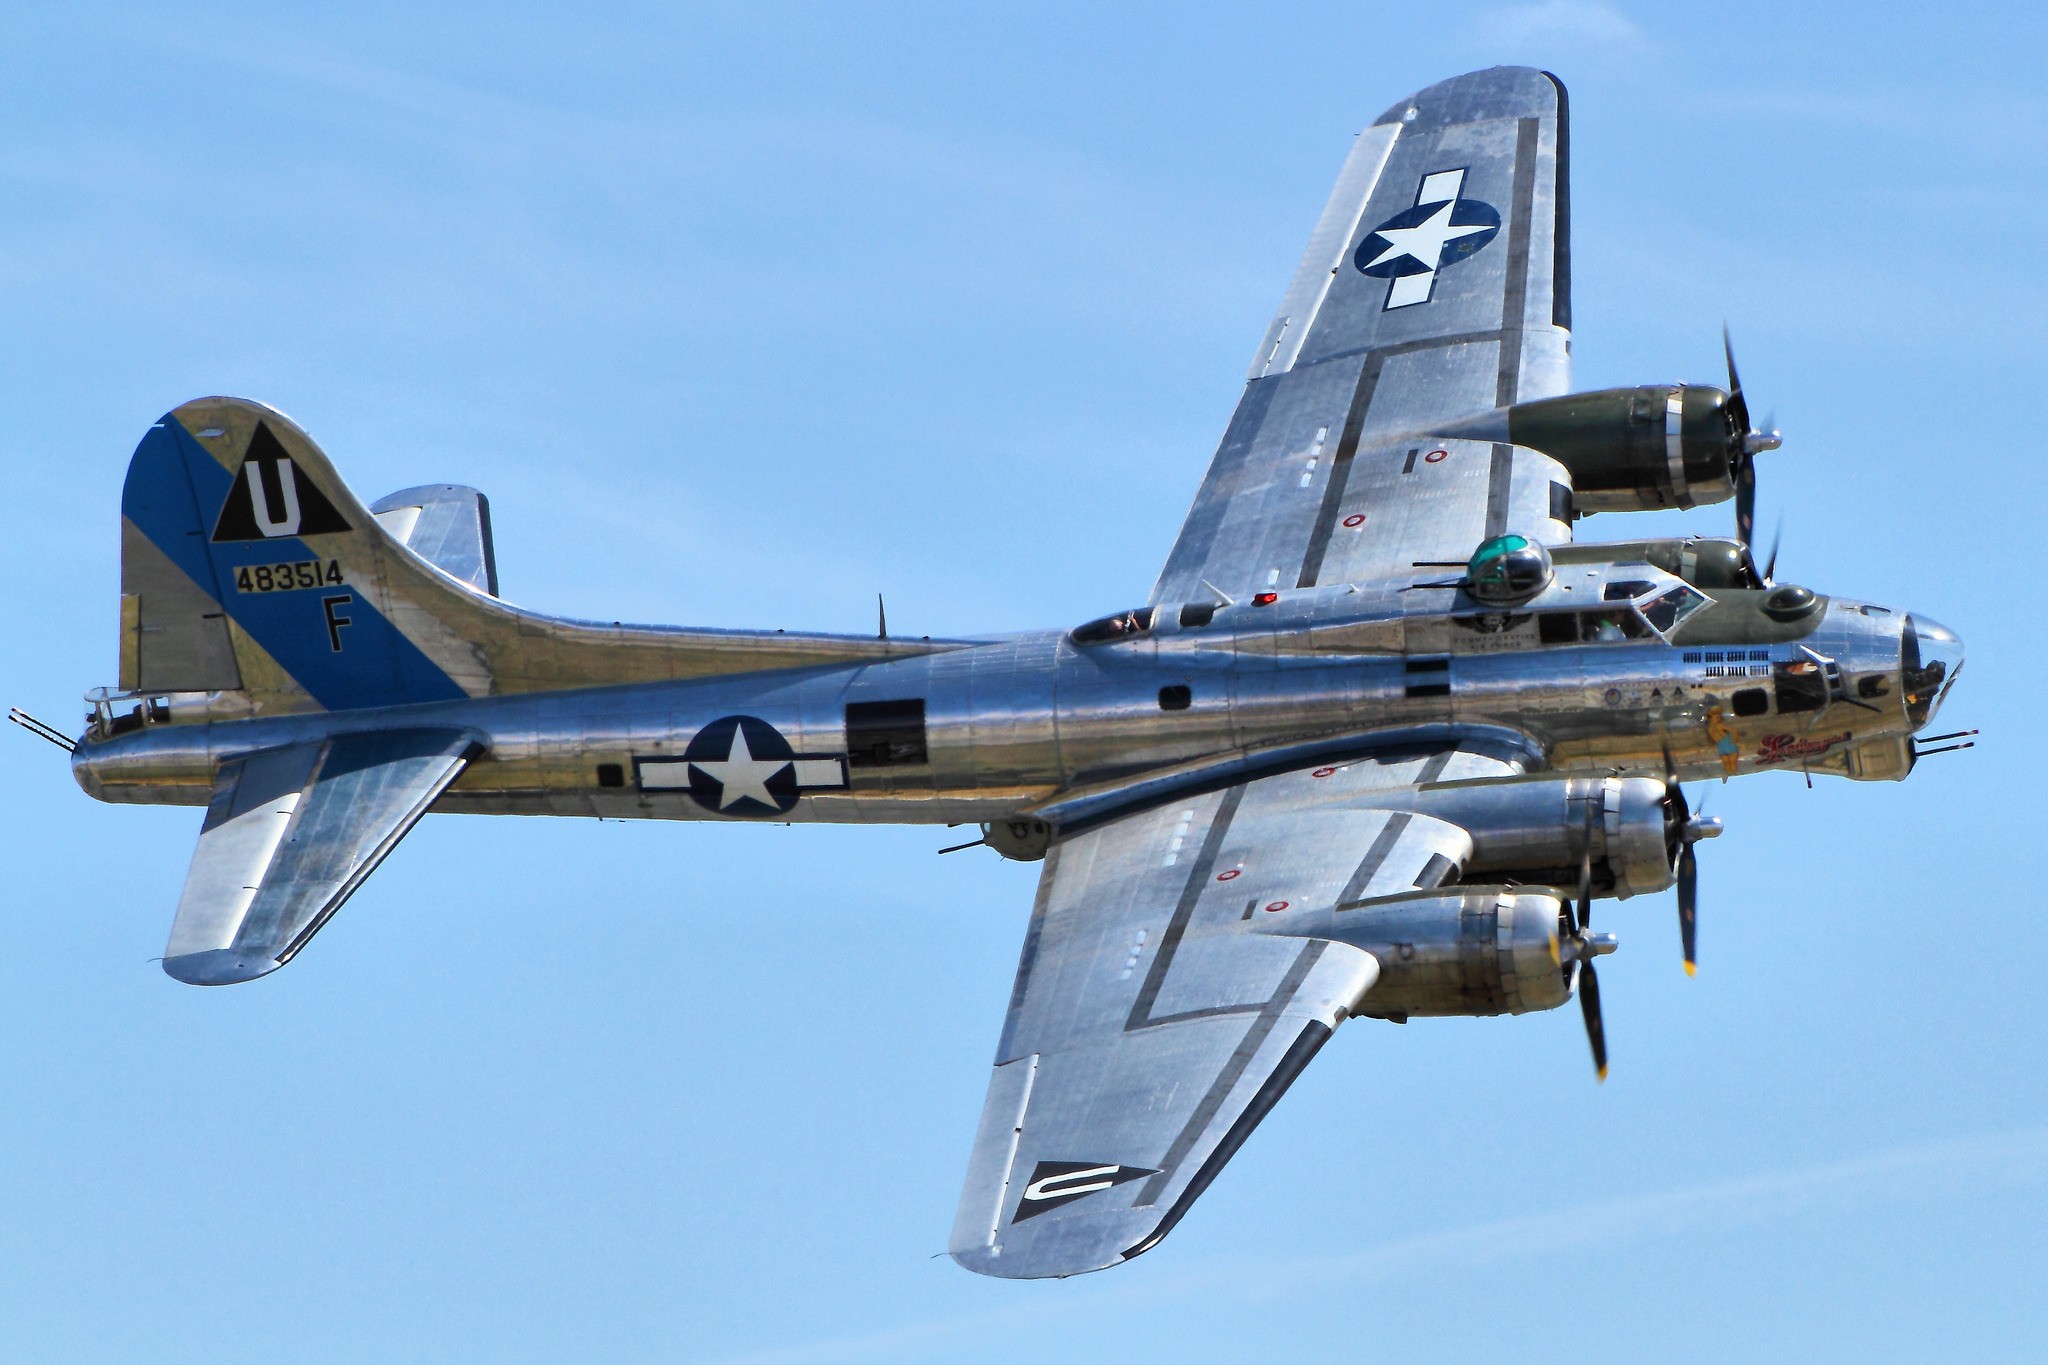 General 2048x1365 Boeing B-17 Flying Fortress Bomber airplane aircraft vehicle military aircraft US Air Force military vehicle numbers military American aircraft Boeing